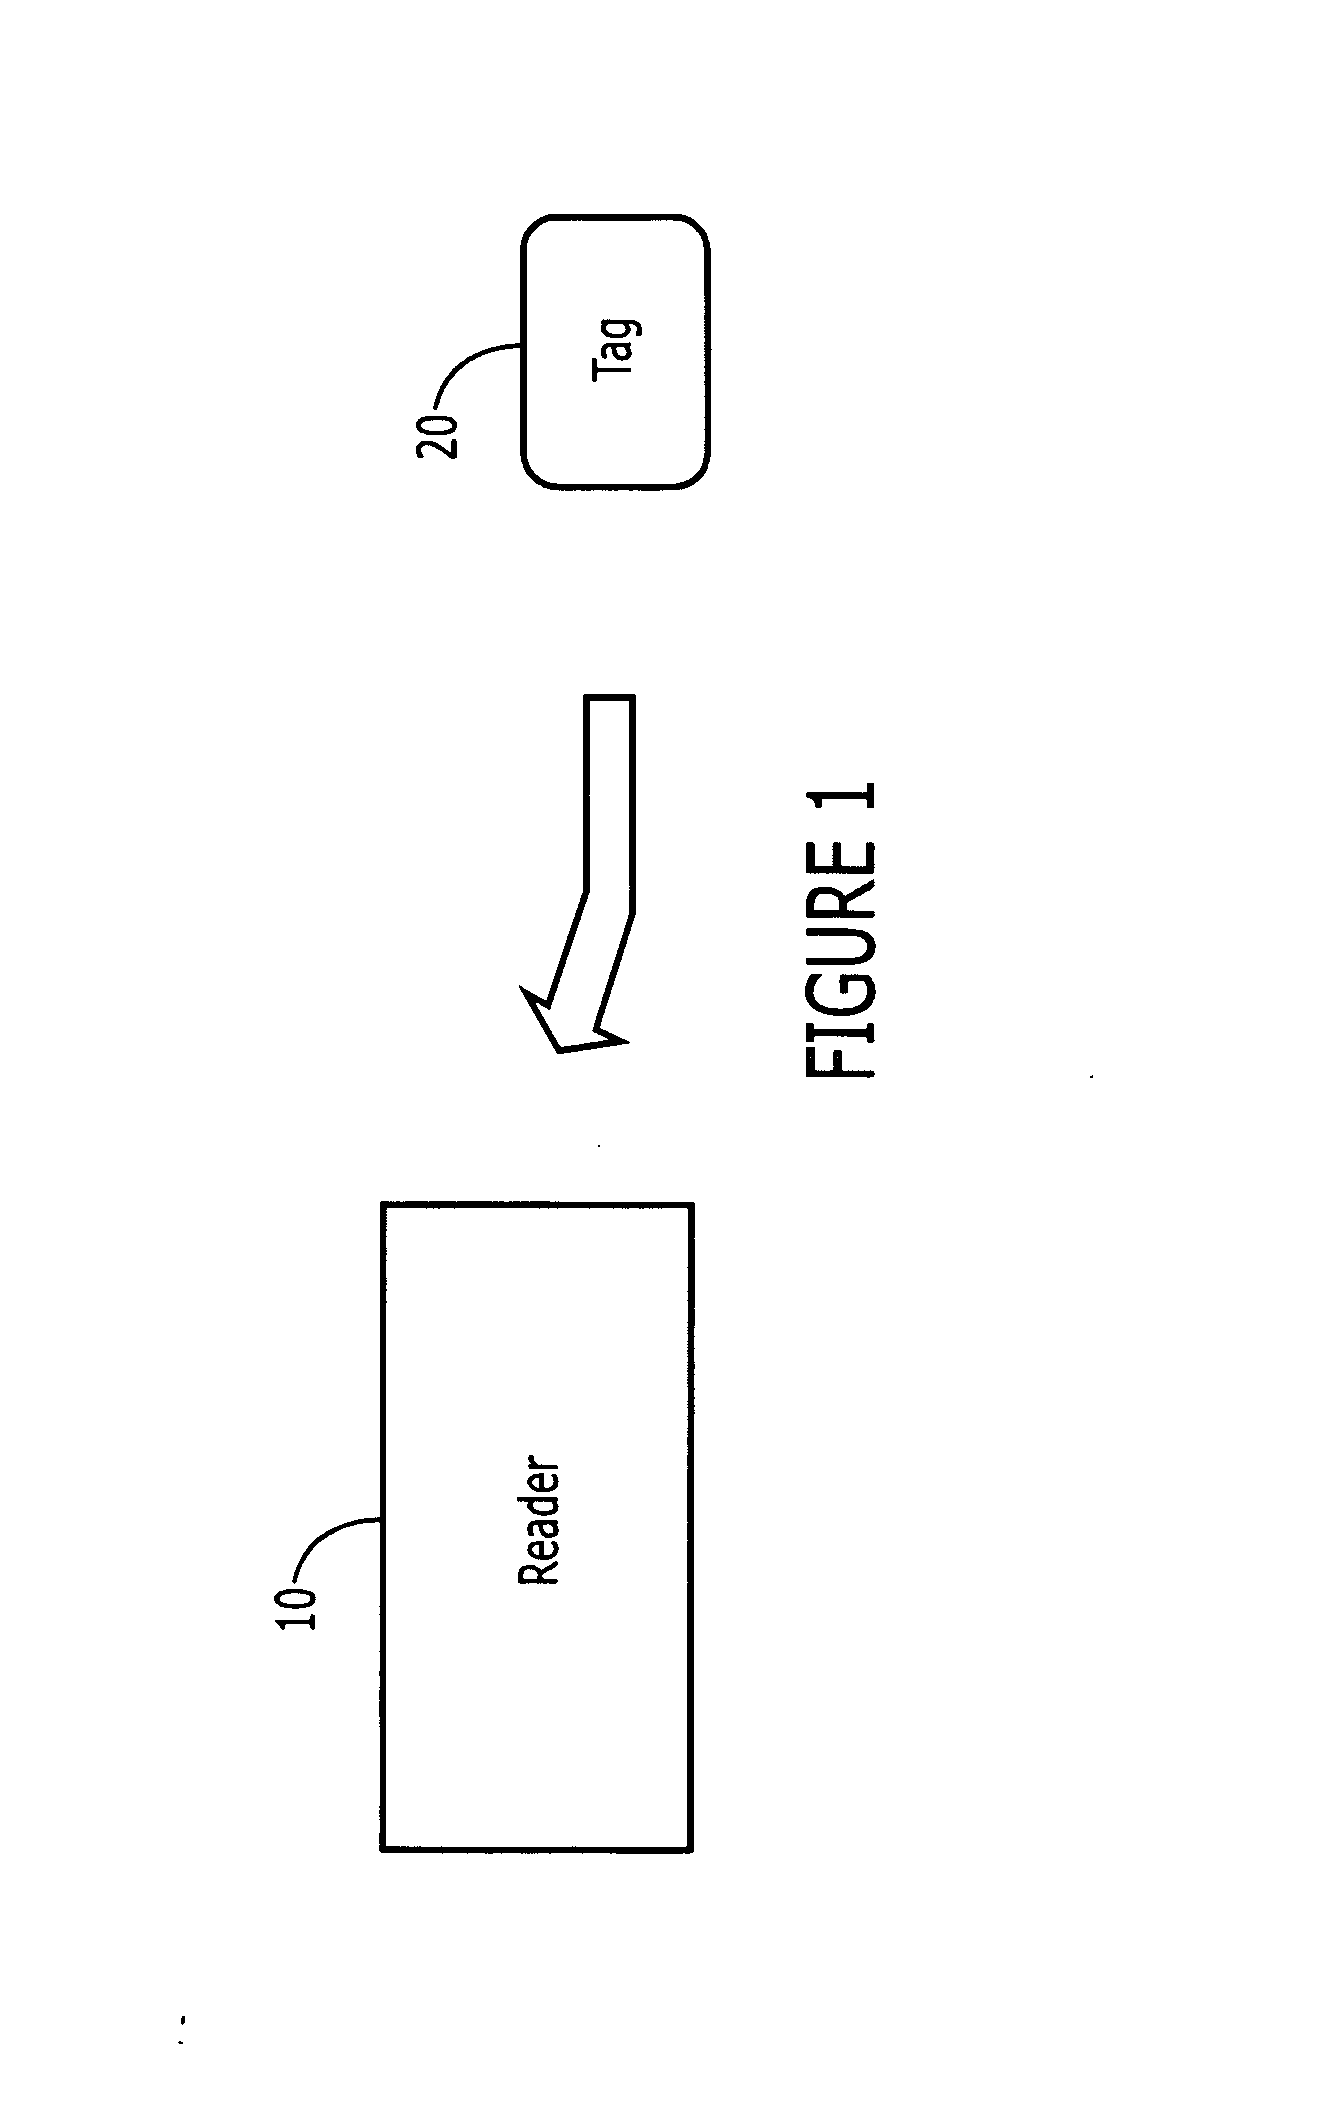 Reducing power consumption of a short-range wireless communication reader associated with a mobile terminal